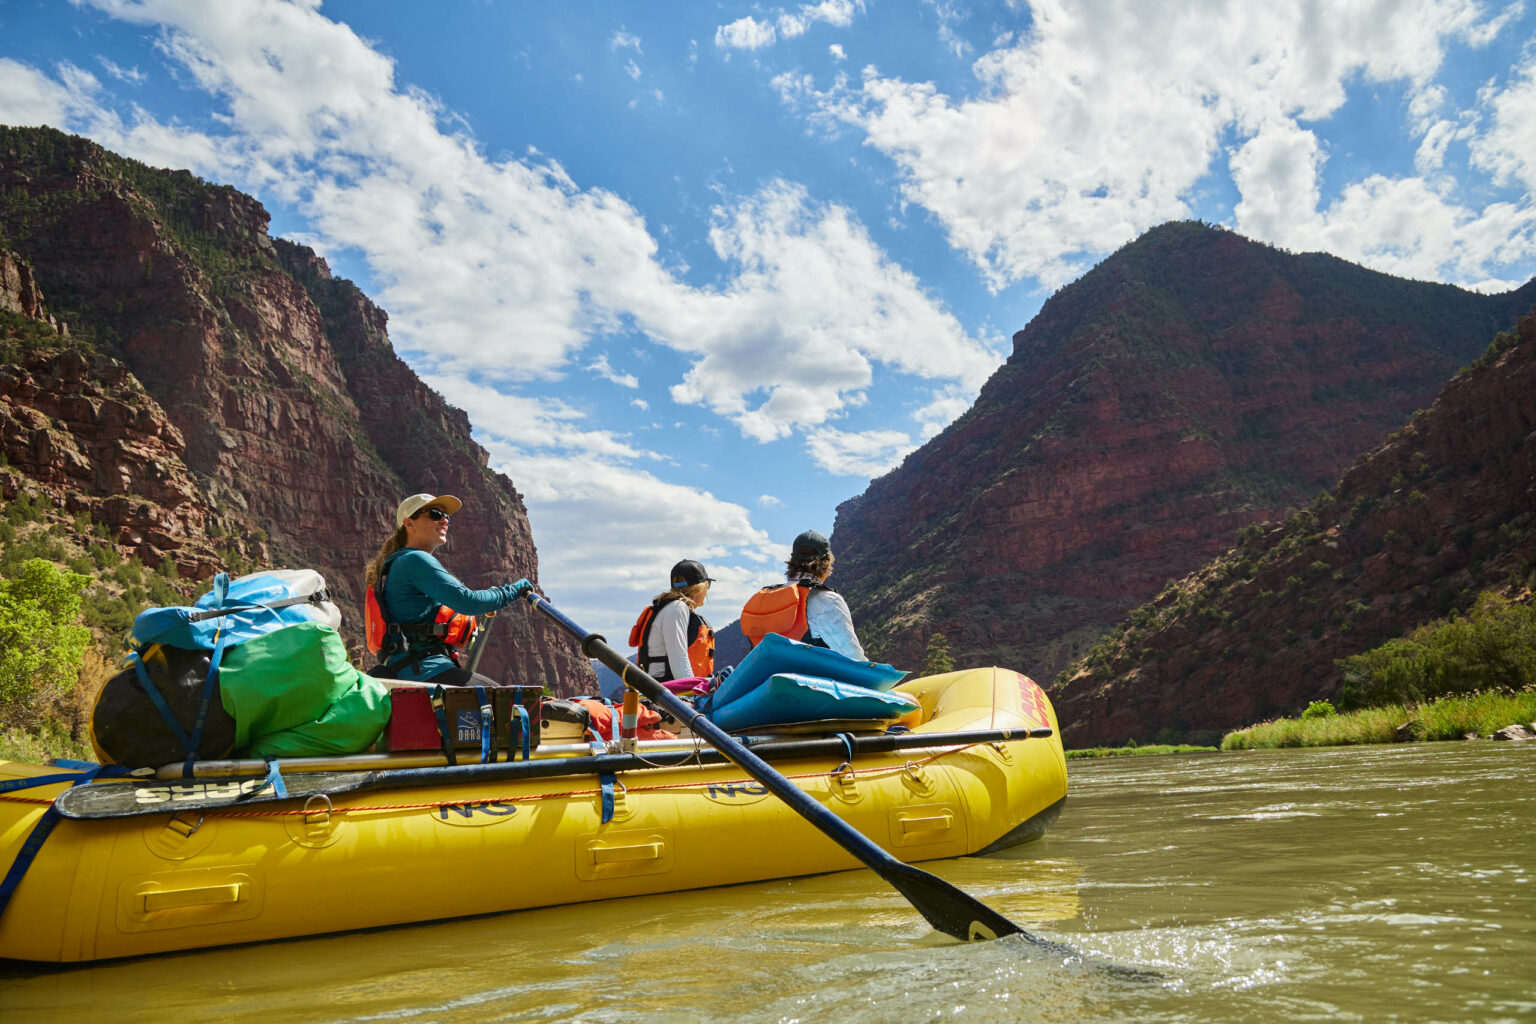 Group rafting on a river near Dinosaur National Monument.